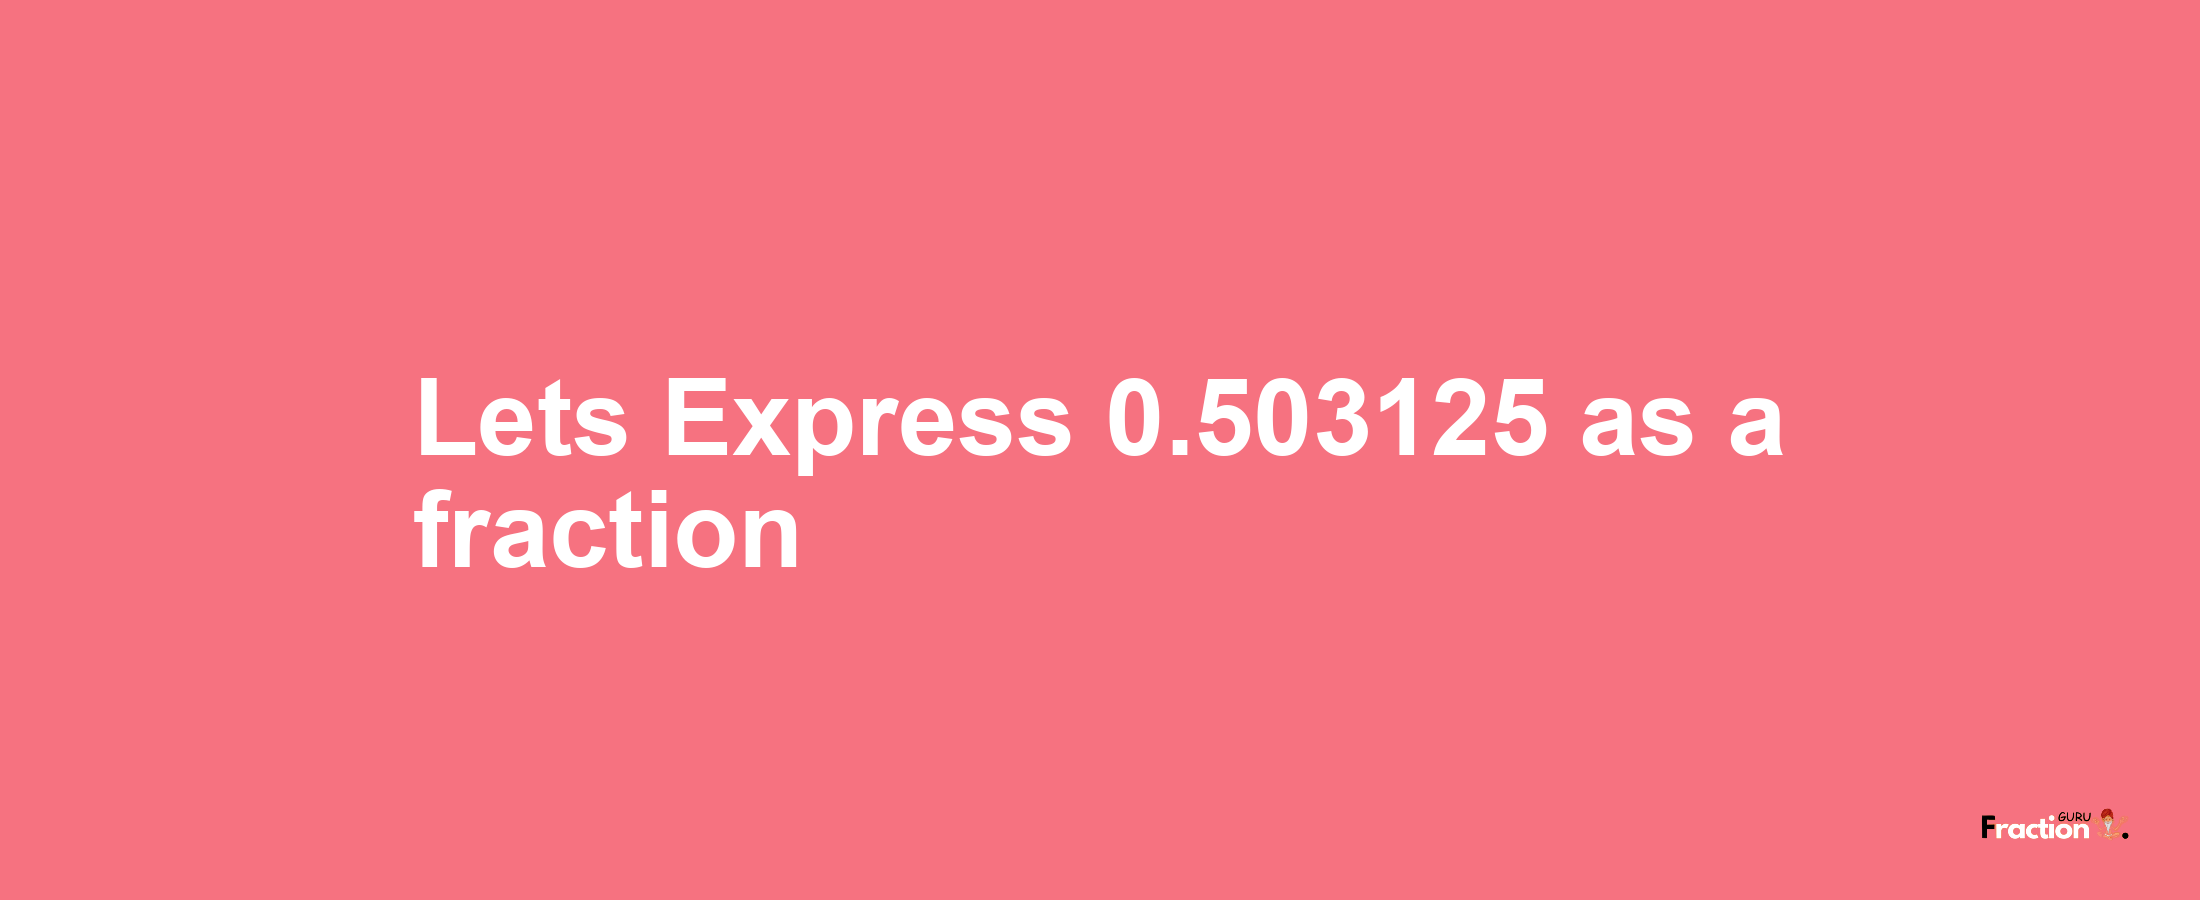 Lets Express 0.503125 as afraction